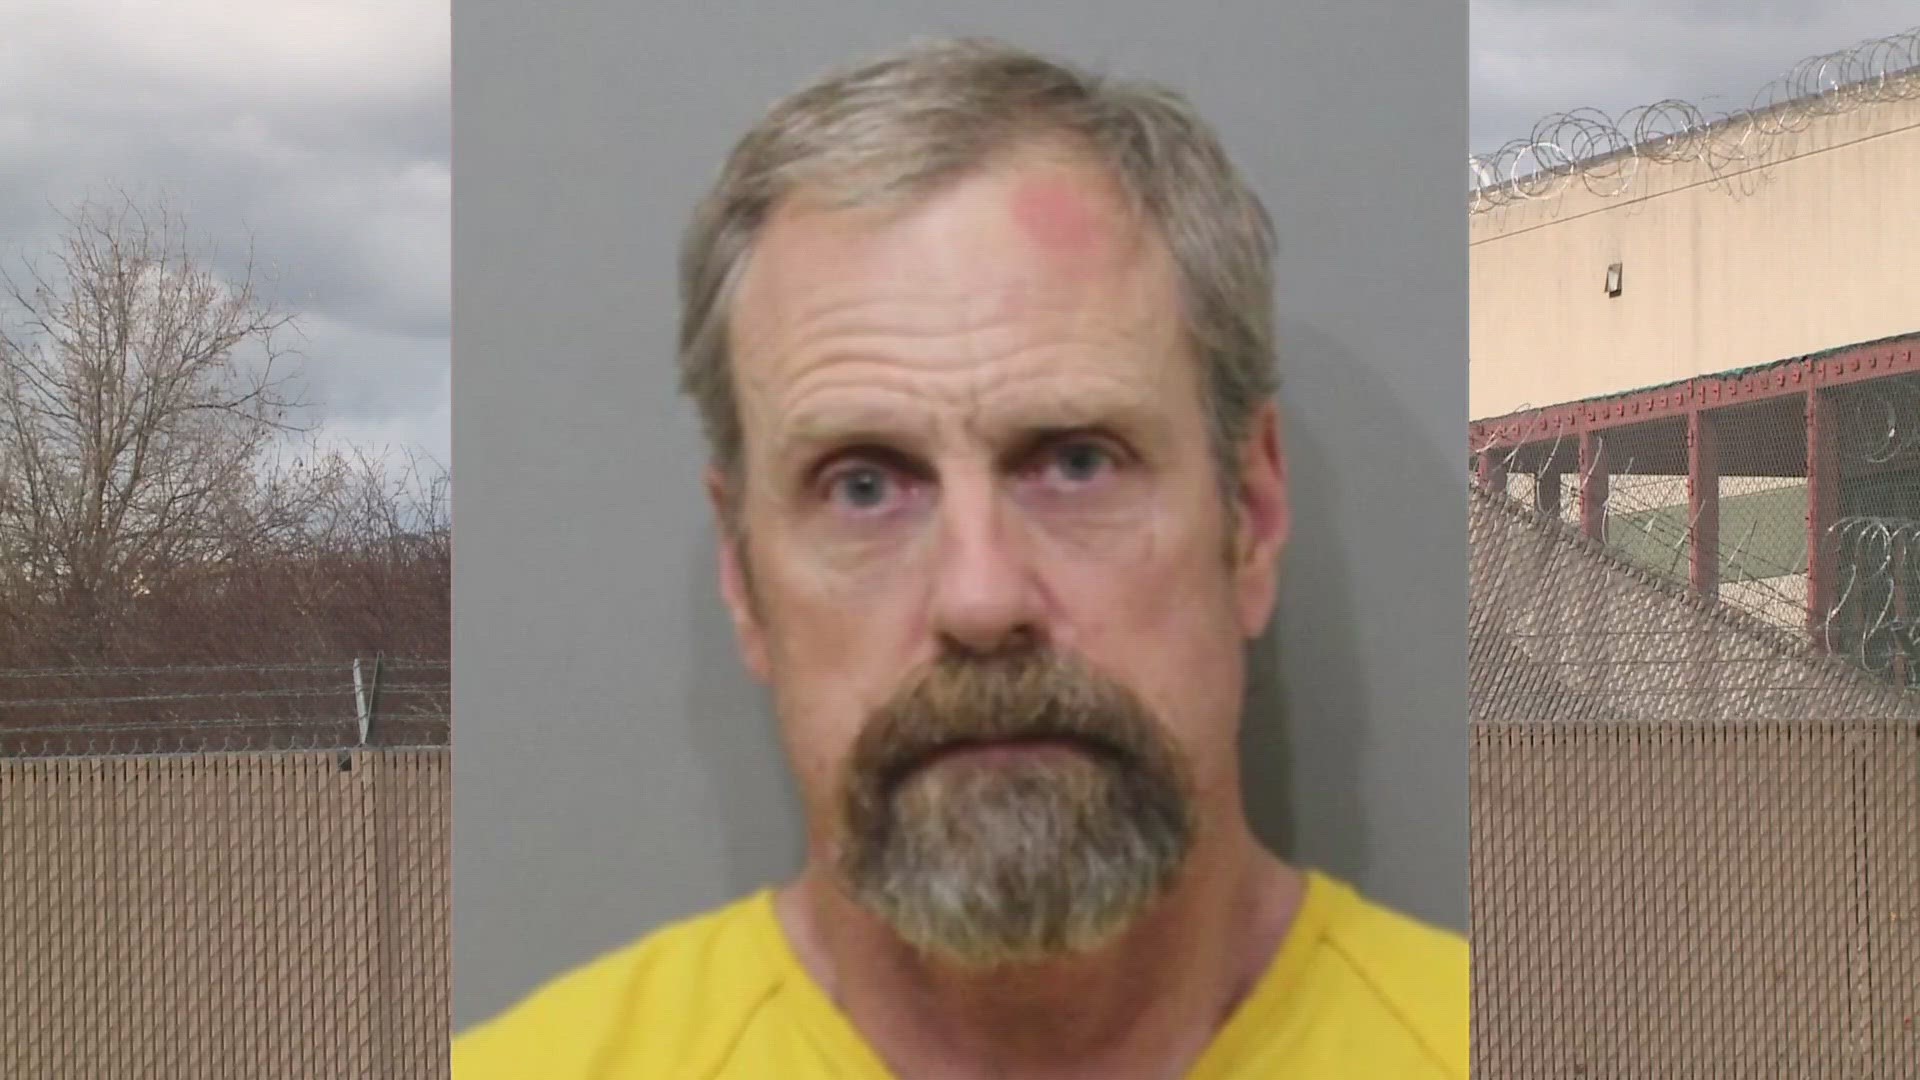 57-year-old Daniel Charles Howard is accused of murder and felony domestic battery in connection to the 2021 murder of his then-wife.